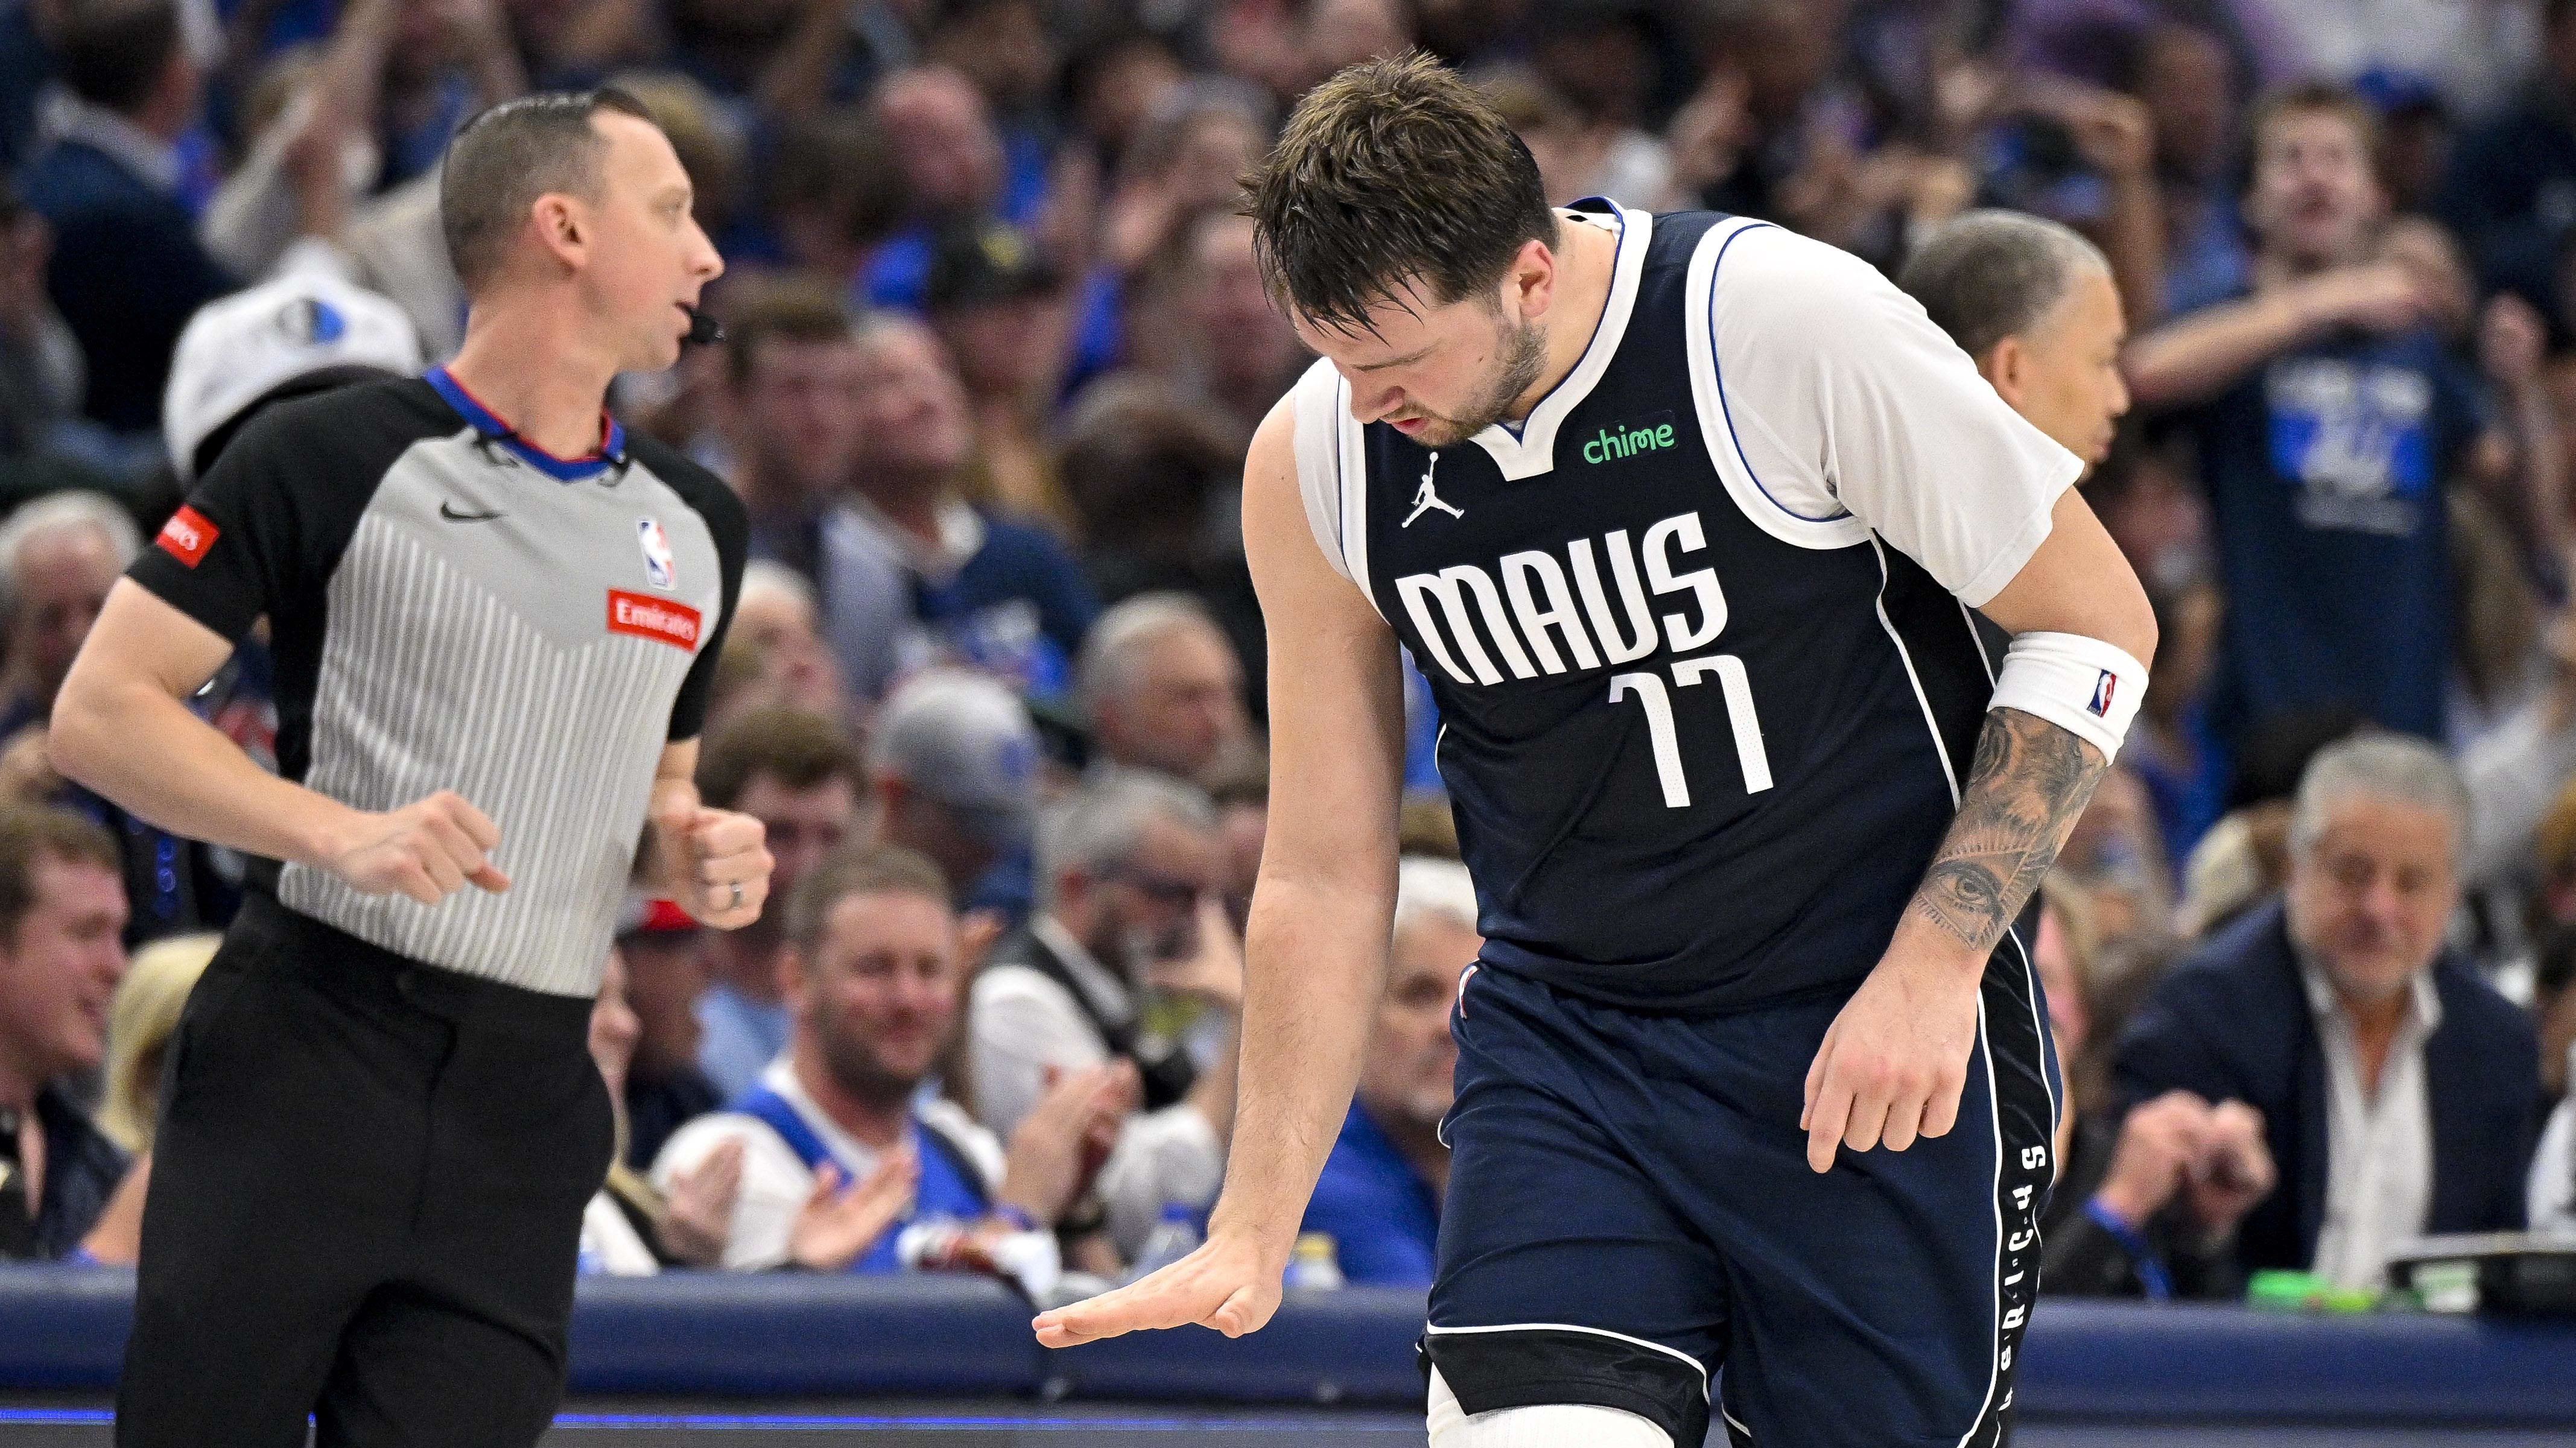 Luka Doncic, Kyrie Irving Propel Dallas Mavericks to 2-1 Series Lead vs. Clippers